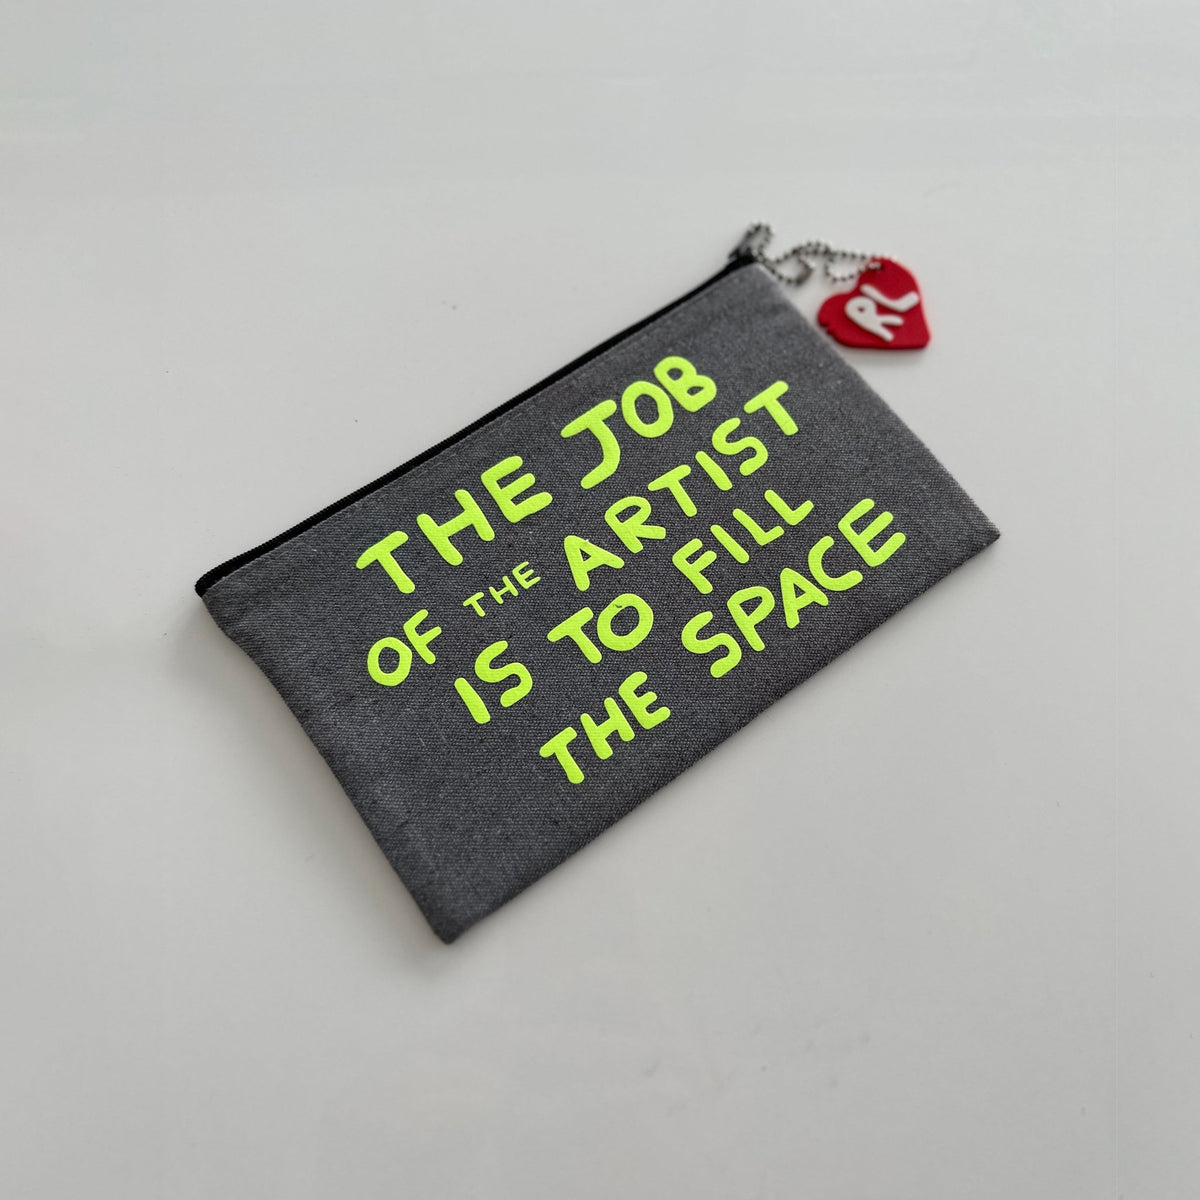 The Job of the Artist Bank Pouch - RED LETTERS